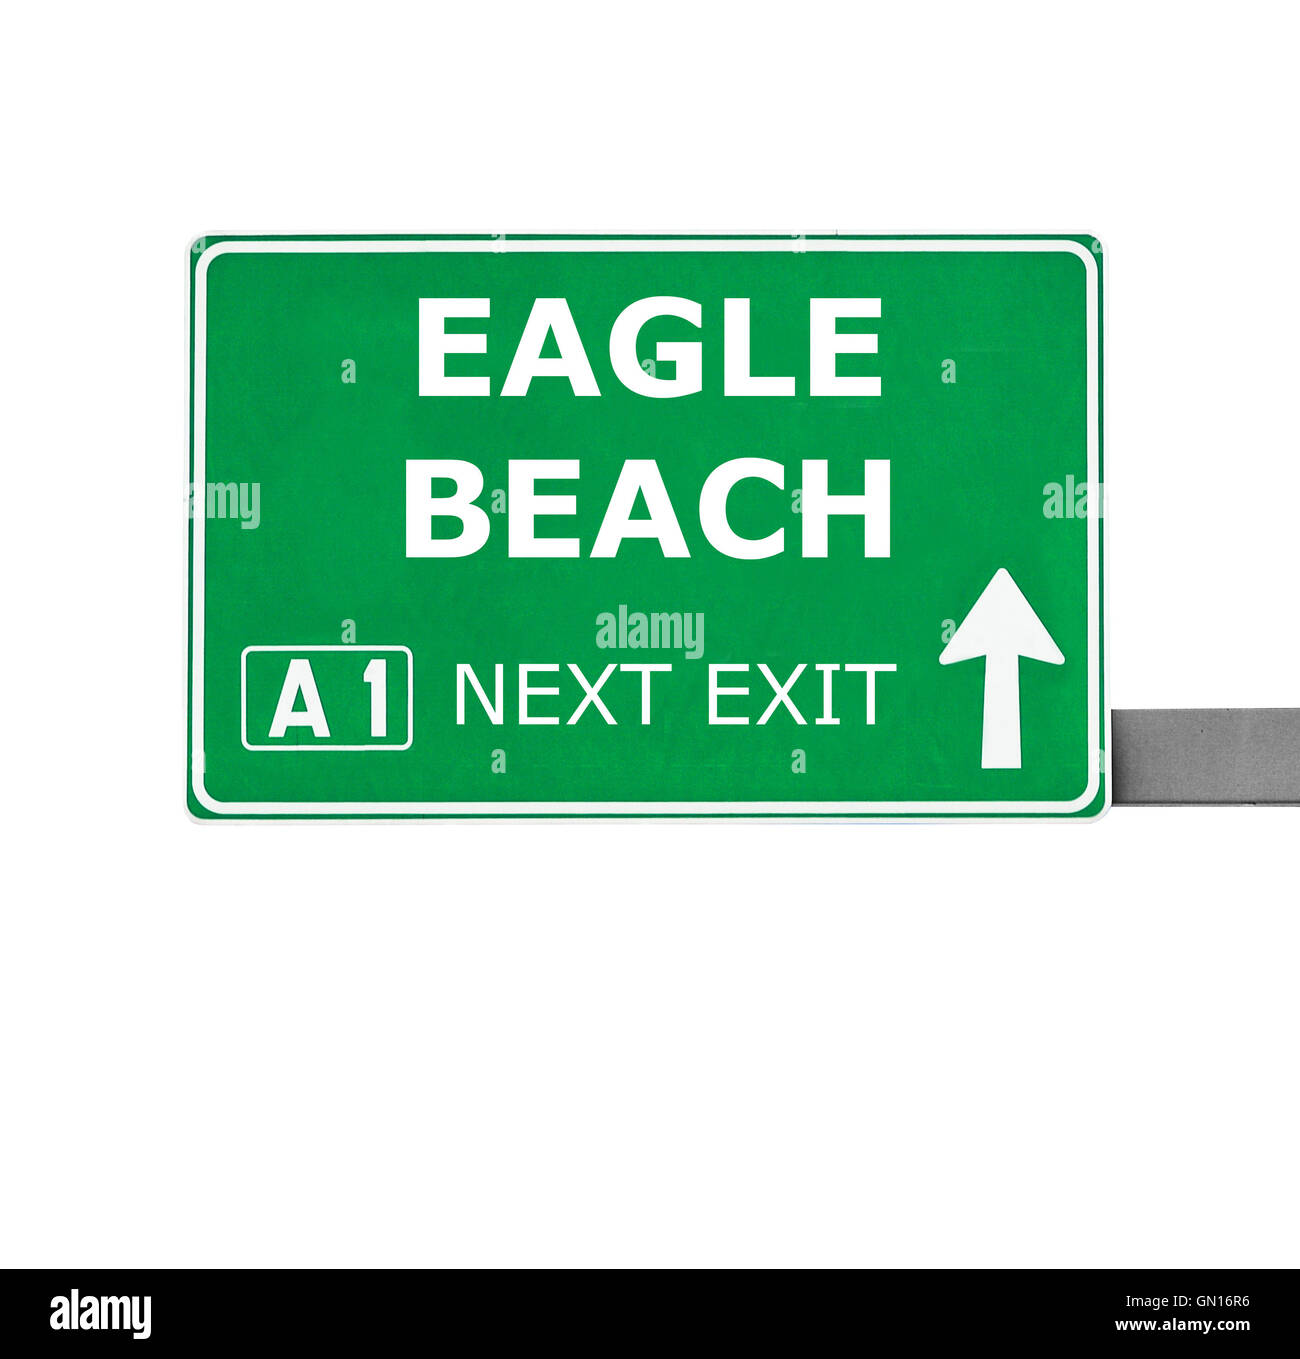 EAGLE BEACH road sign isolated on white Stock Photo